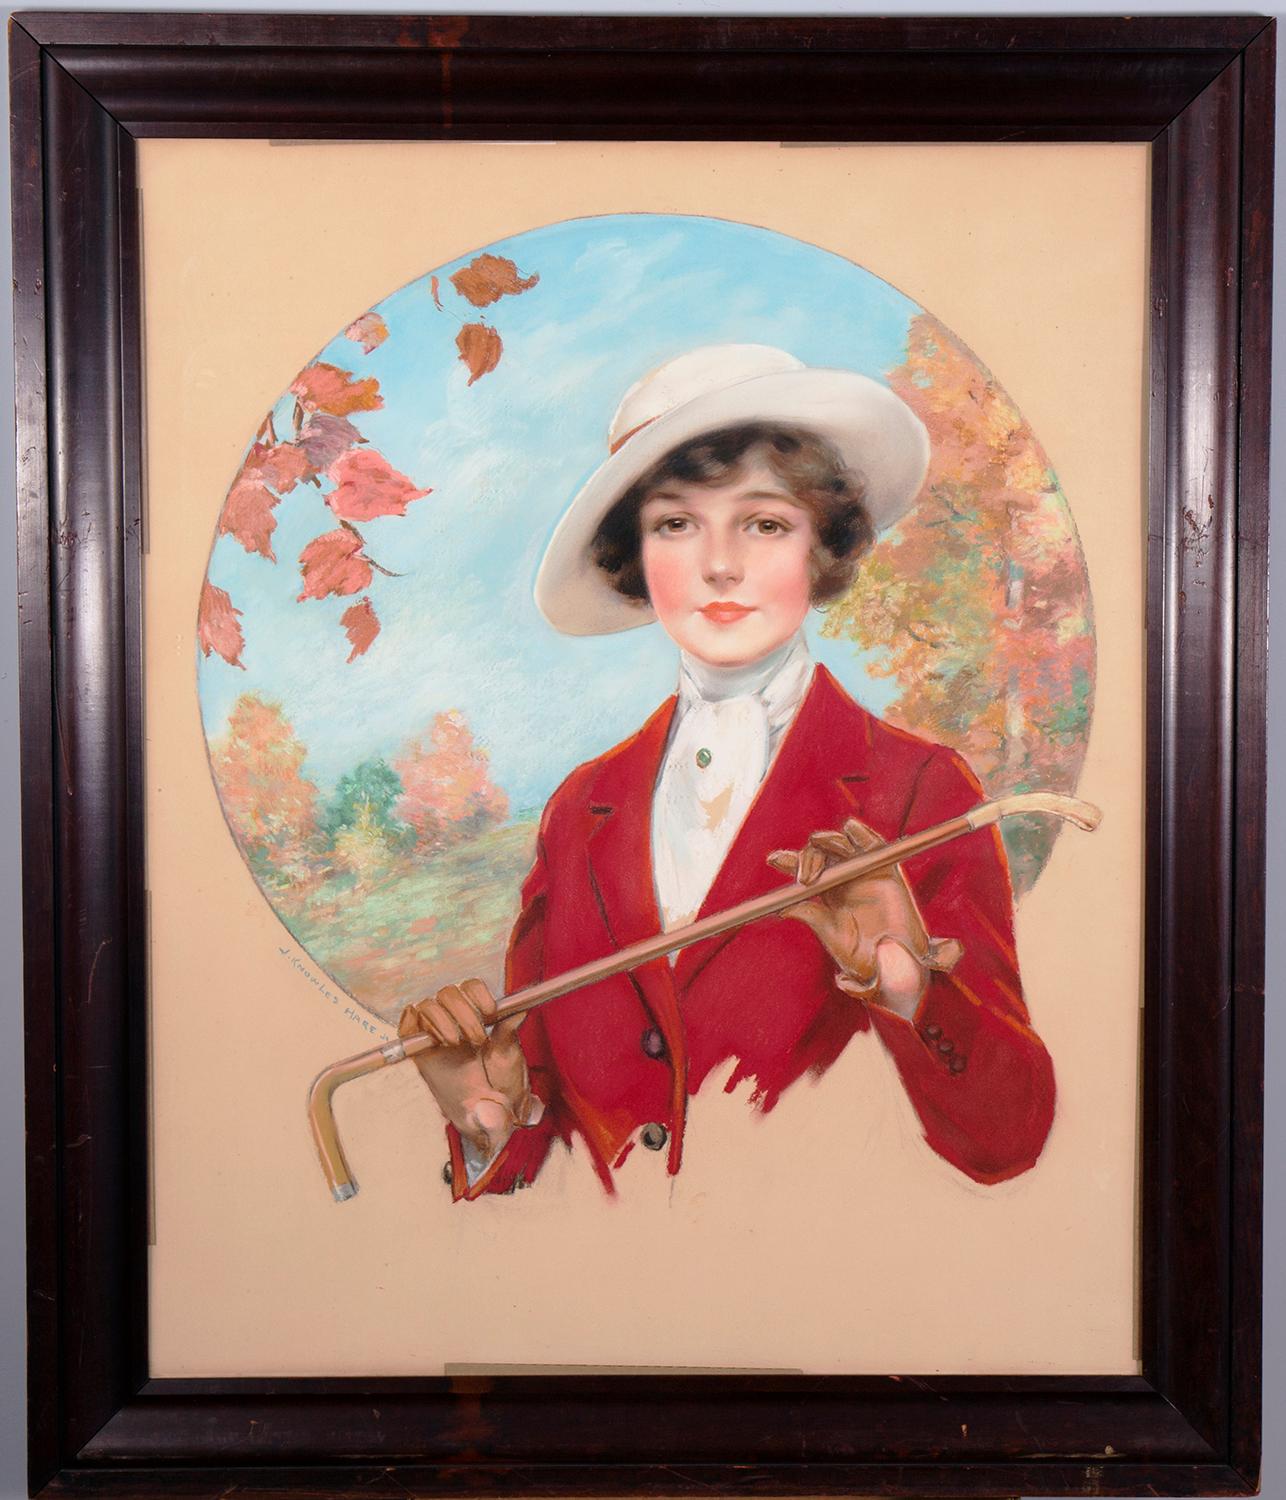 The Sunshine Girl - Autumn - Painting by J. Knowles Hare